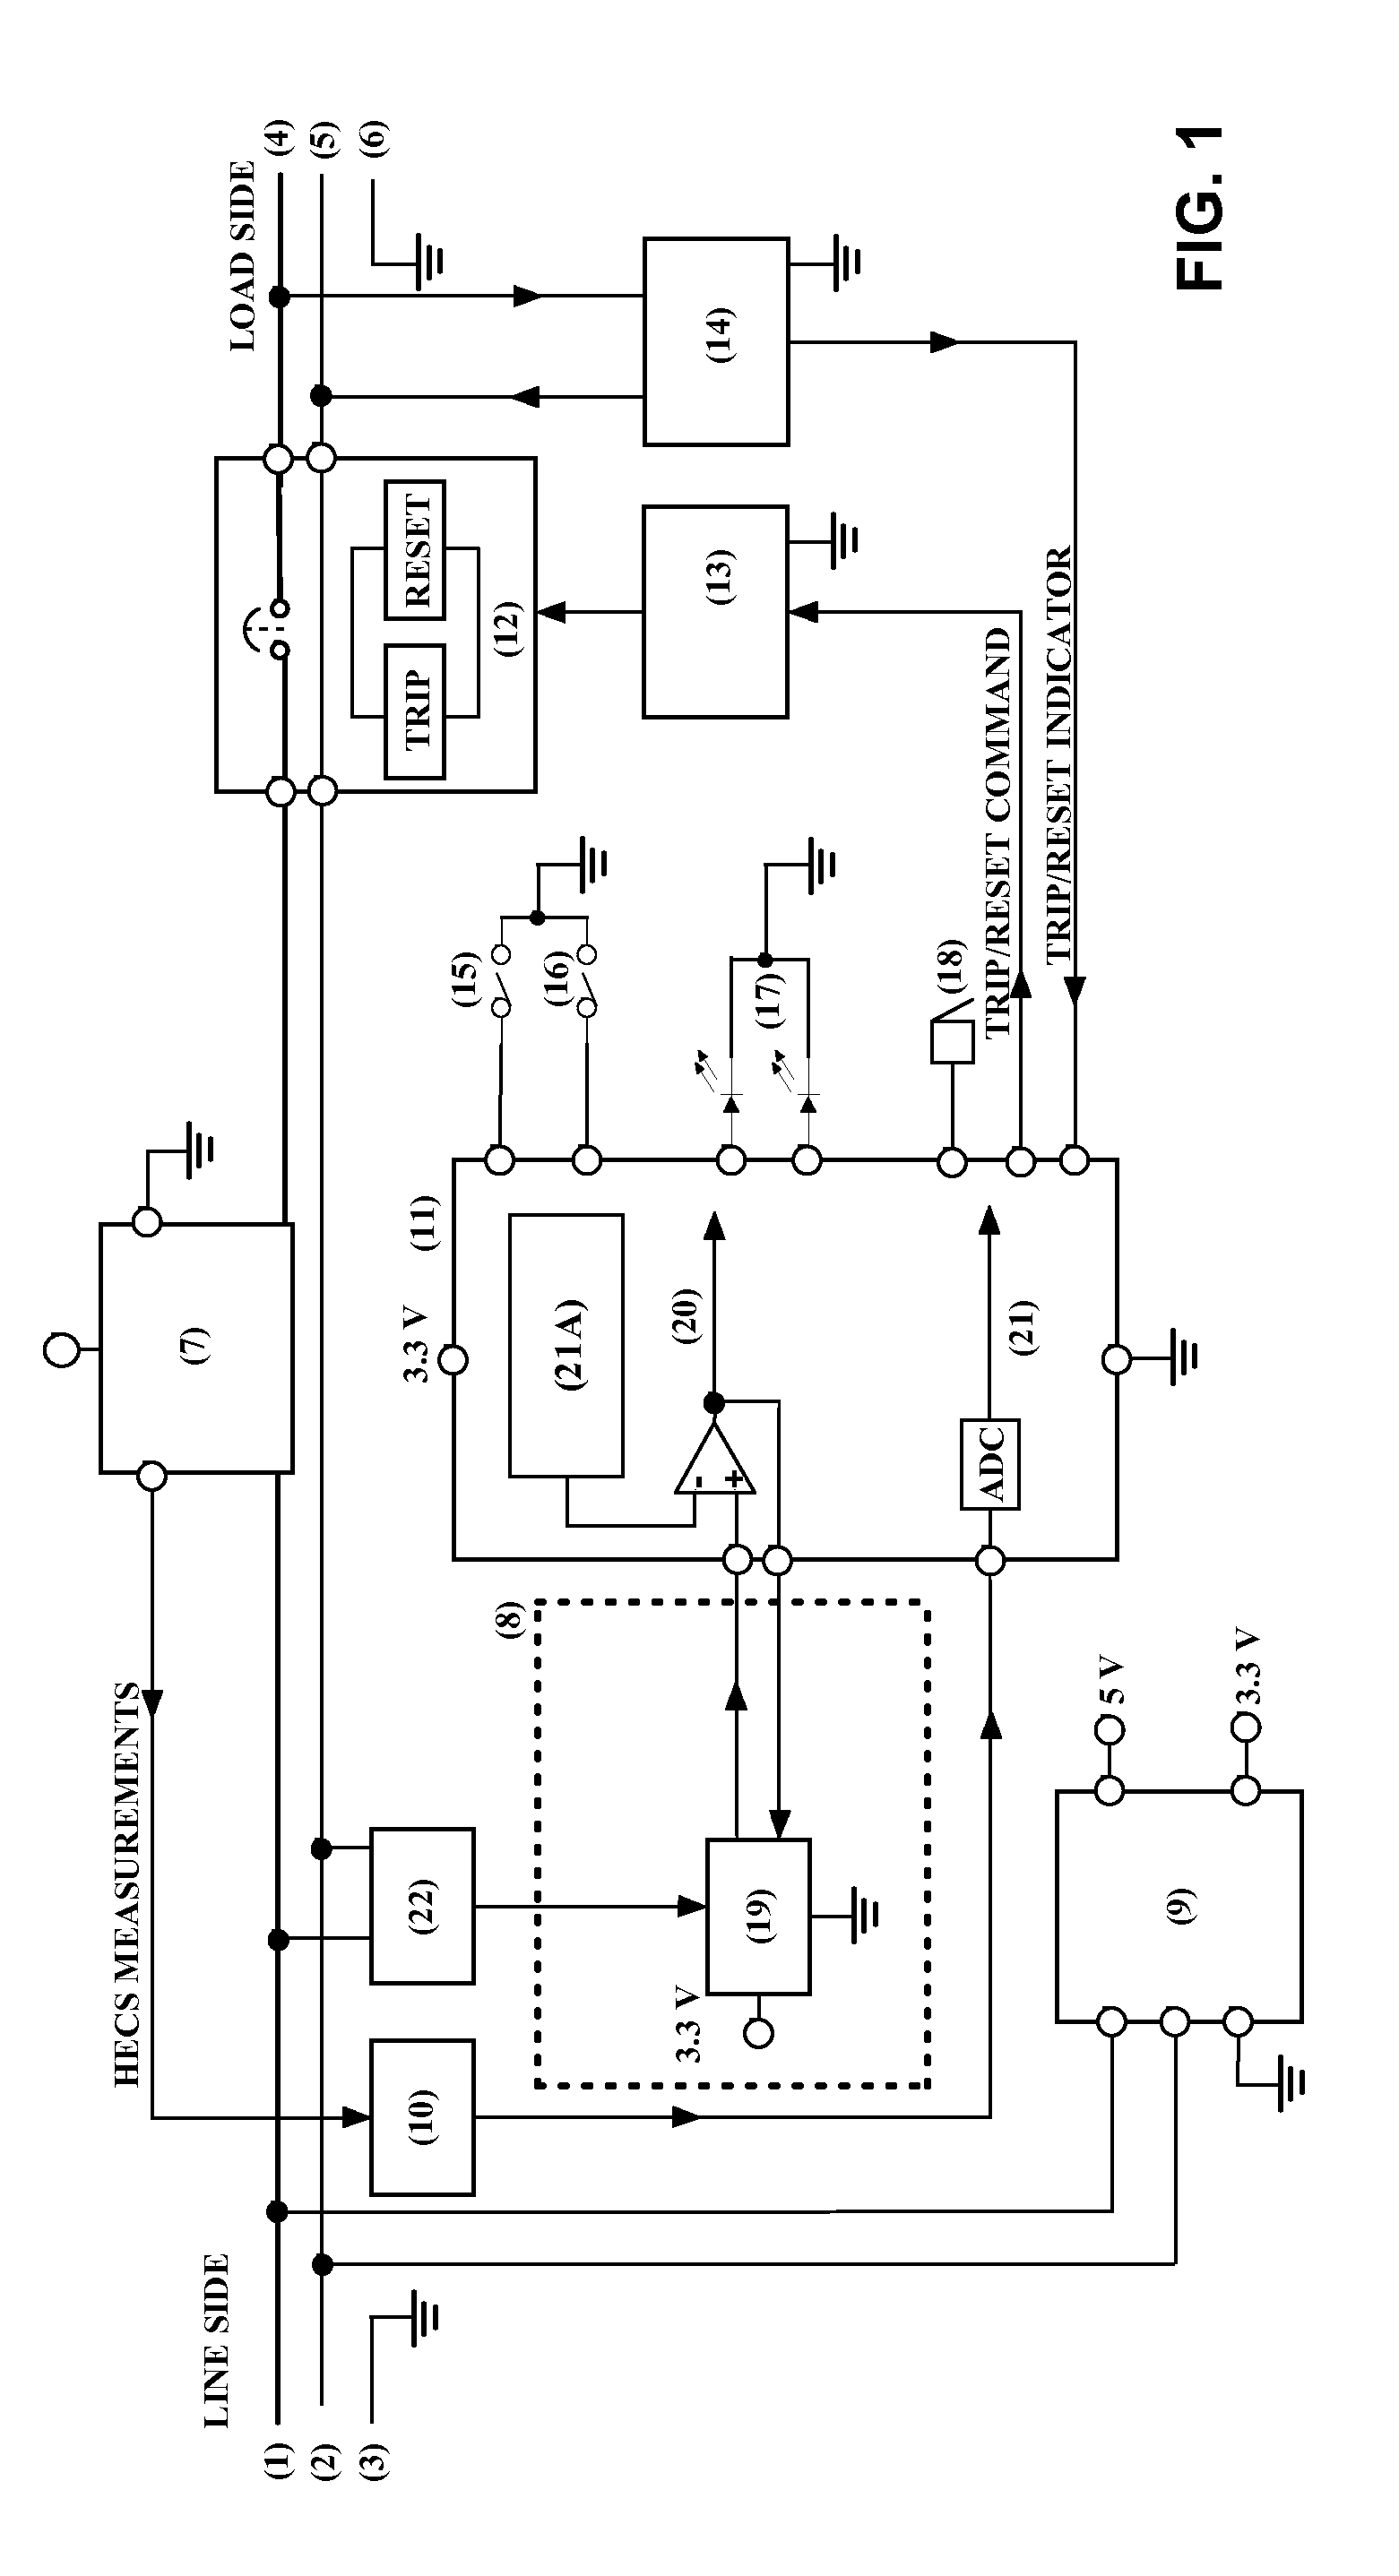 Miswire protection and annunciation of system conditions for arc fault circuit interrupters and other wiring devices